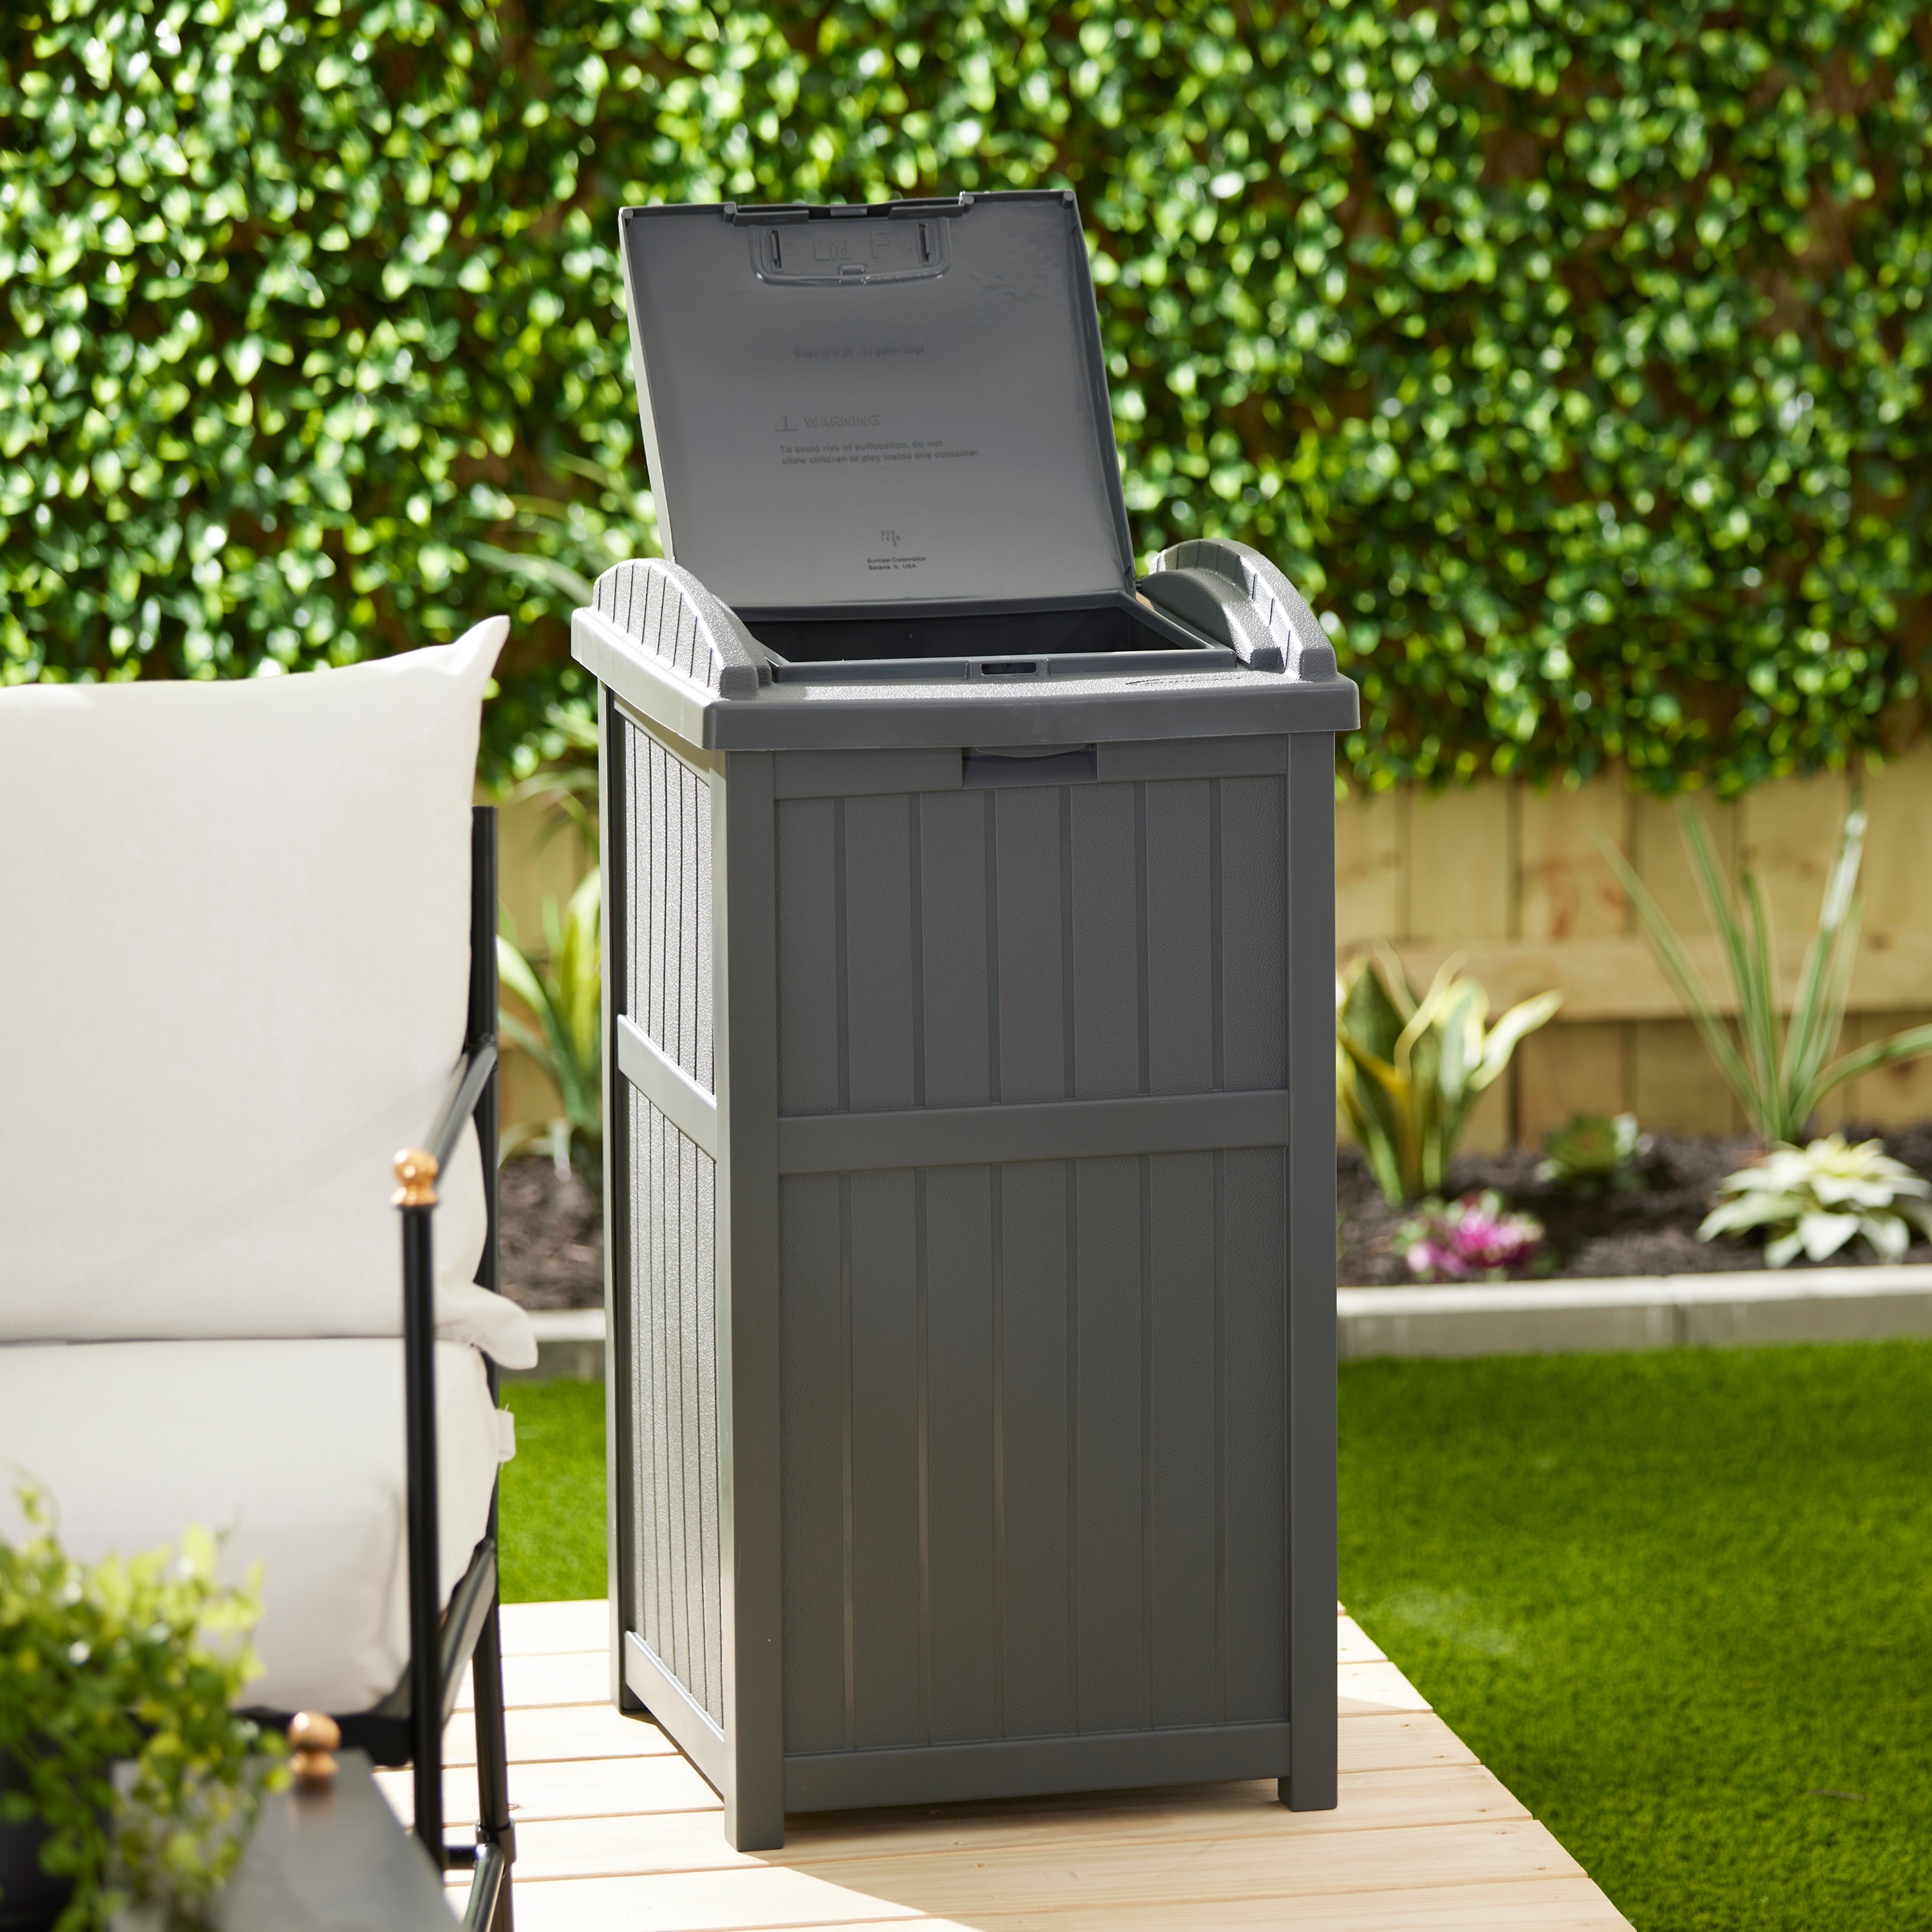 https://ak1.ostkcdn.com/images/products/is/images/direct/2a9d5c46629b094172f1d754559d25bb707aaaa1/Suncast-Trashcan-Hideaway-Outdoor-33-Gallon-Garbage-Trash-Waste-Bin%2C-Cyberspace.jpg